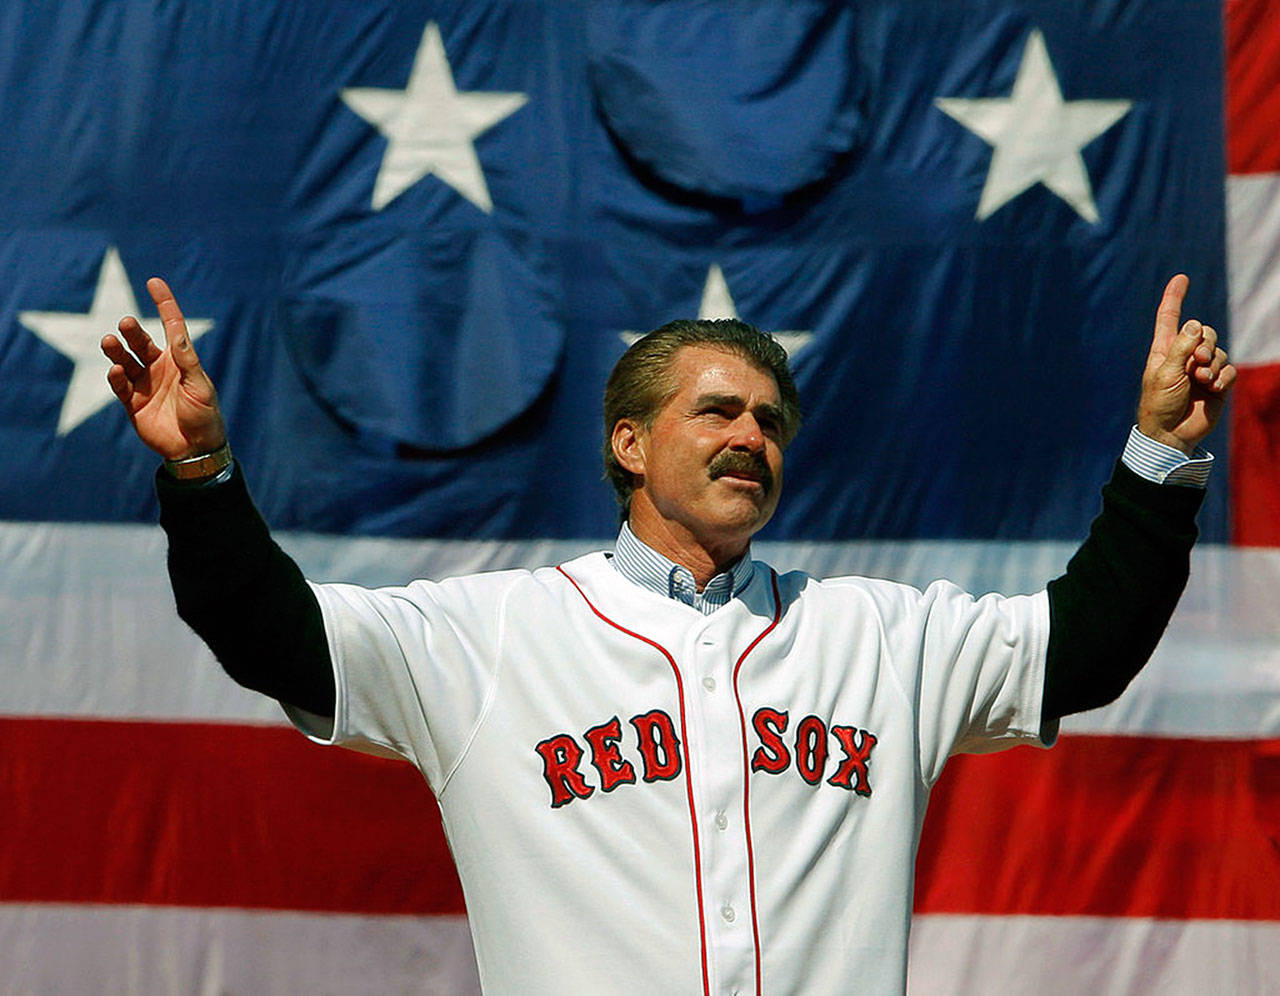 Former Boston Red Sox player Bill Buckner acknowledges the cheers from the crowd before throwing out the ceremonial first pitch at the MLB baseball game between the Boston Red Sox and Detroit Tigers on April 8, 2008 at Fenway Park in Boston, Massachusetts. Buckner passed away on Monday at the age of 69. (Brian Snyder-Pool | Getty Images/TNS)